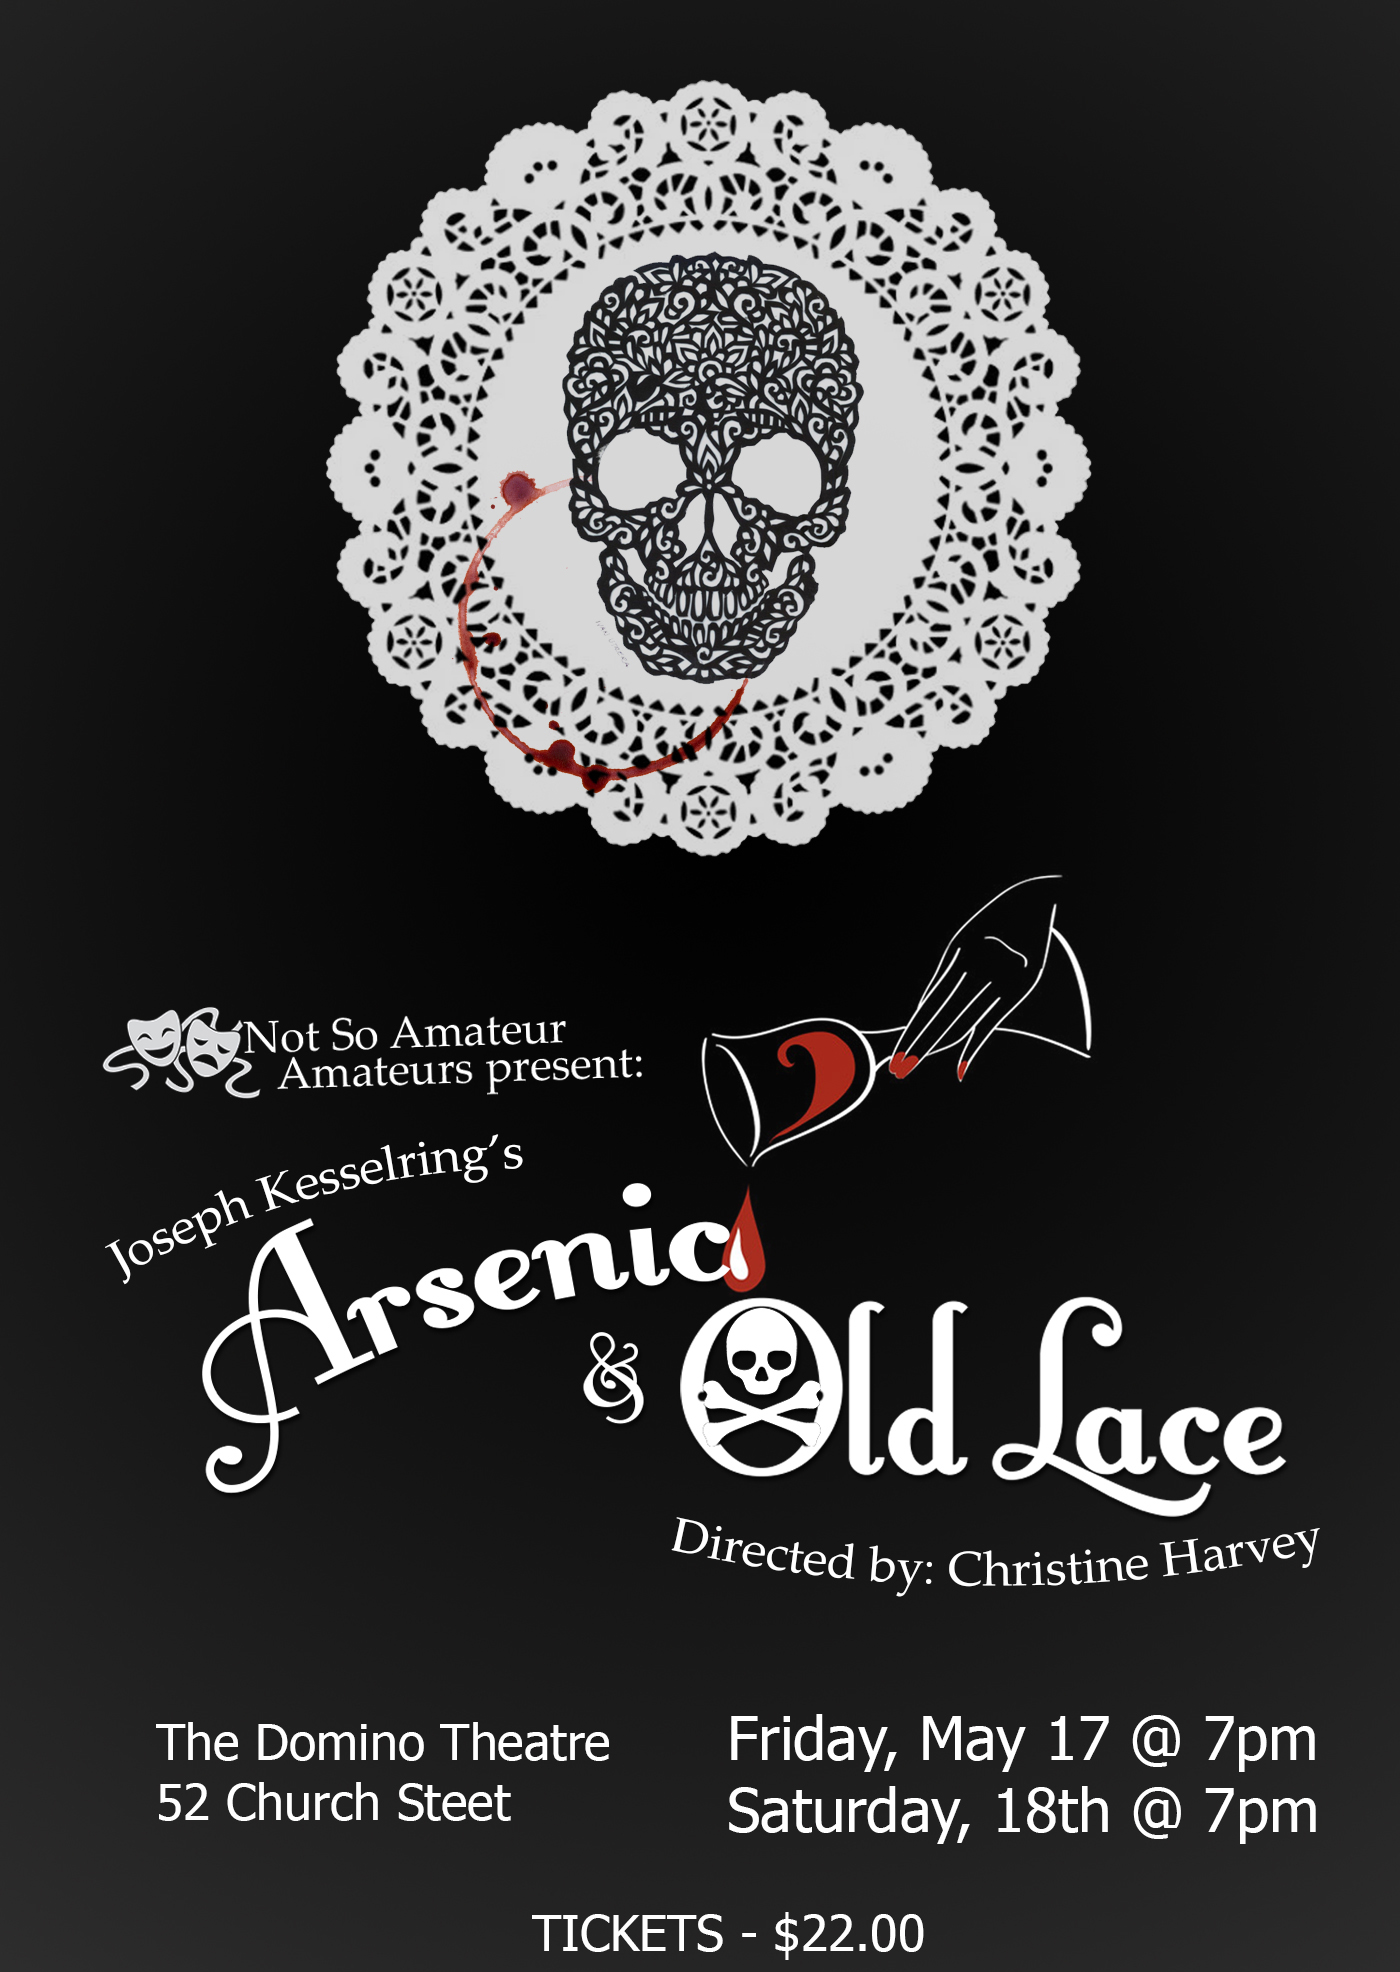 Poster for 'Arsenic and Old Lace'. Company, title, playwright, director, date, time, location are listed.